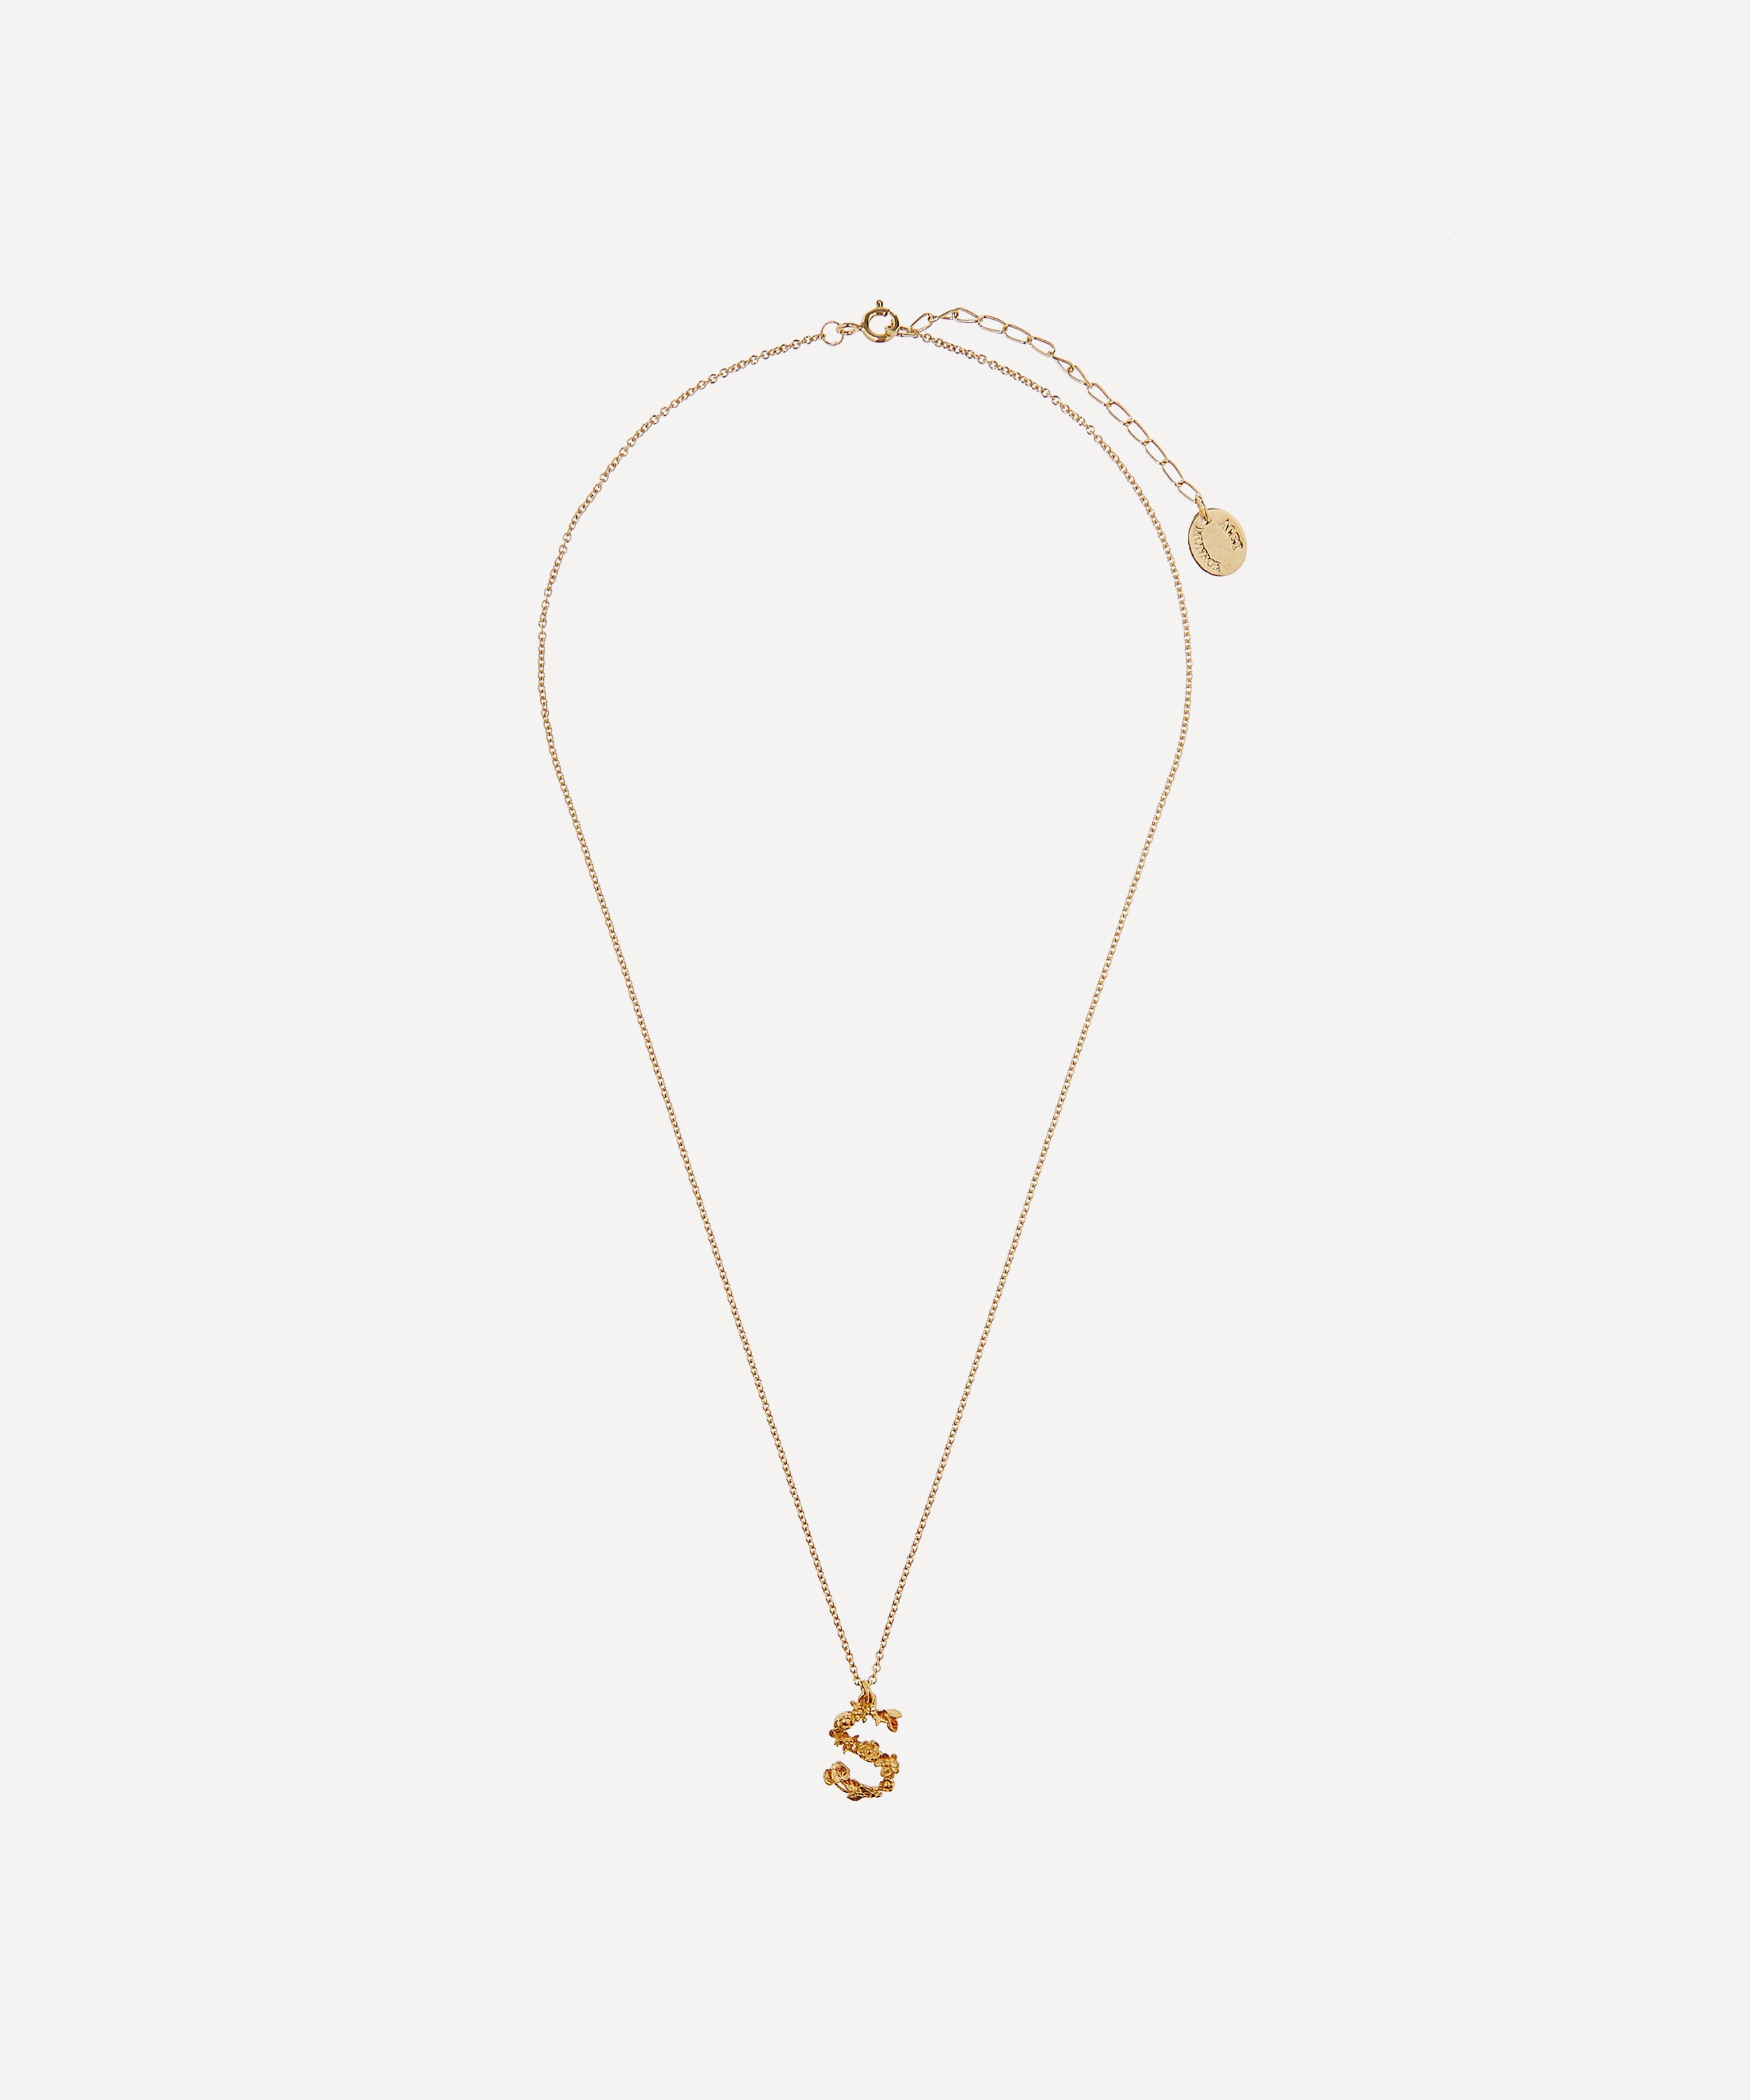 Letters with Love - Pendant four leaf clover rose gold, 39,00 €